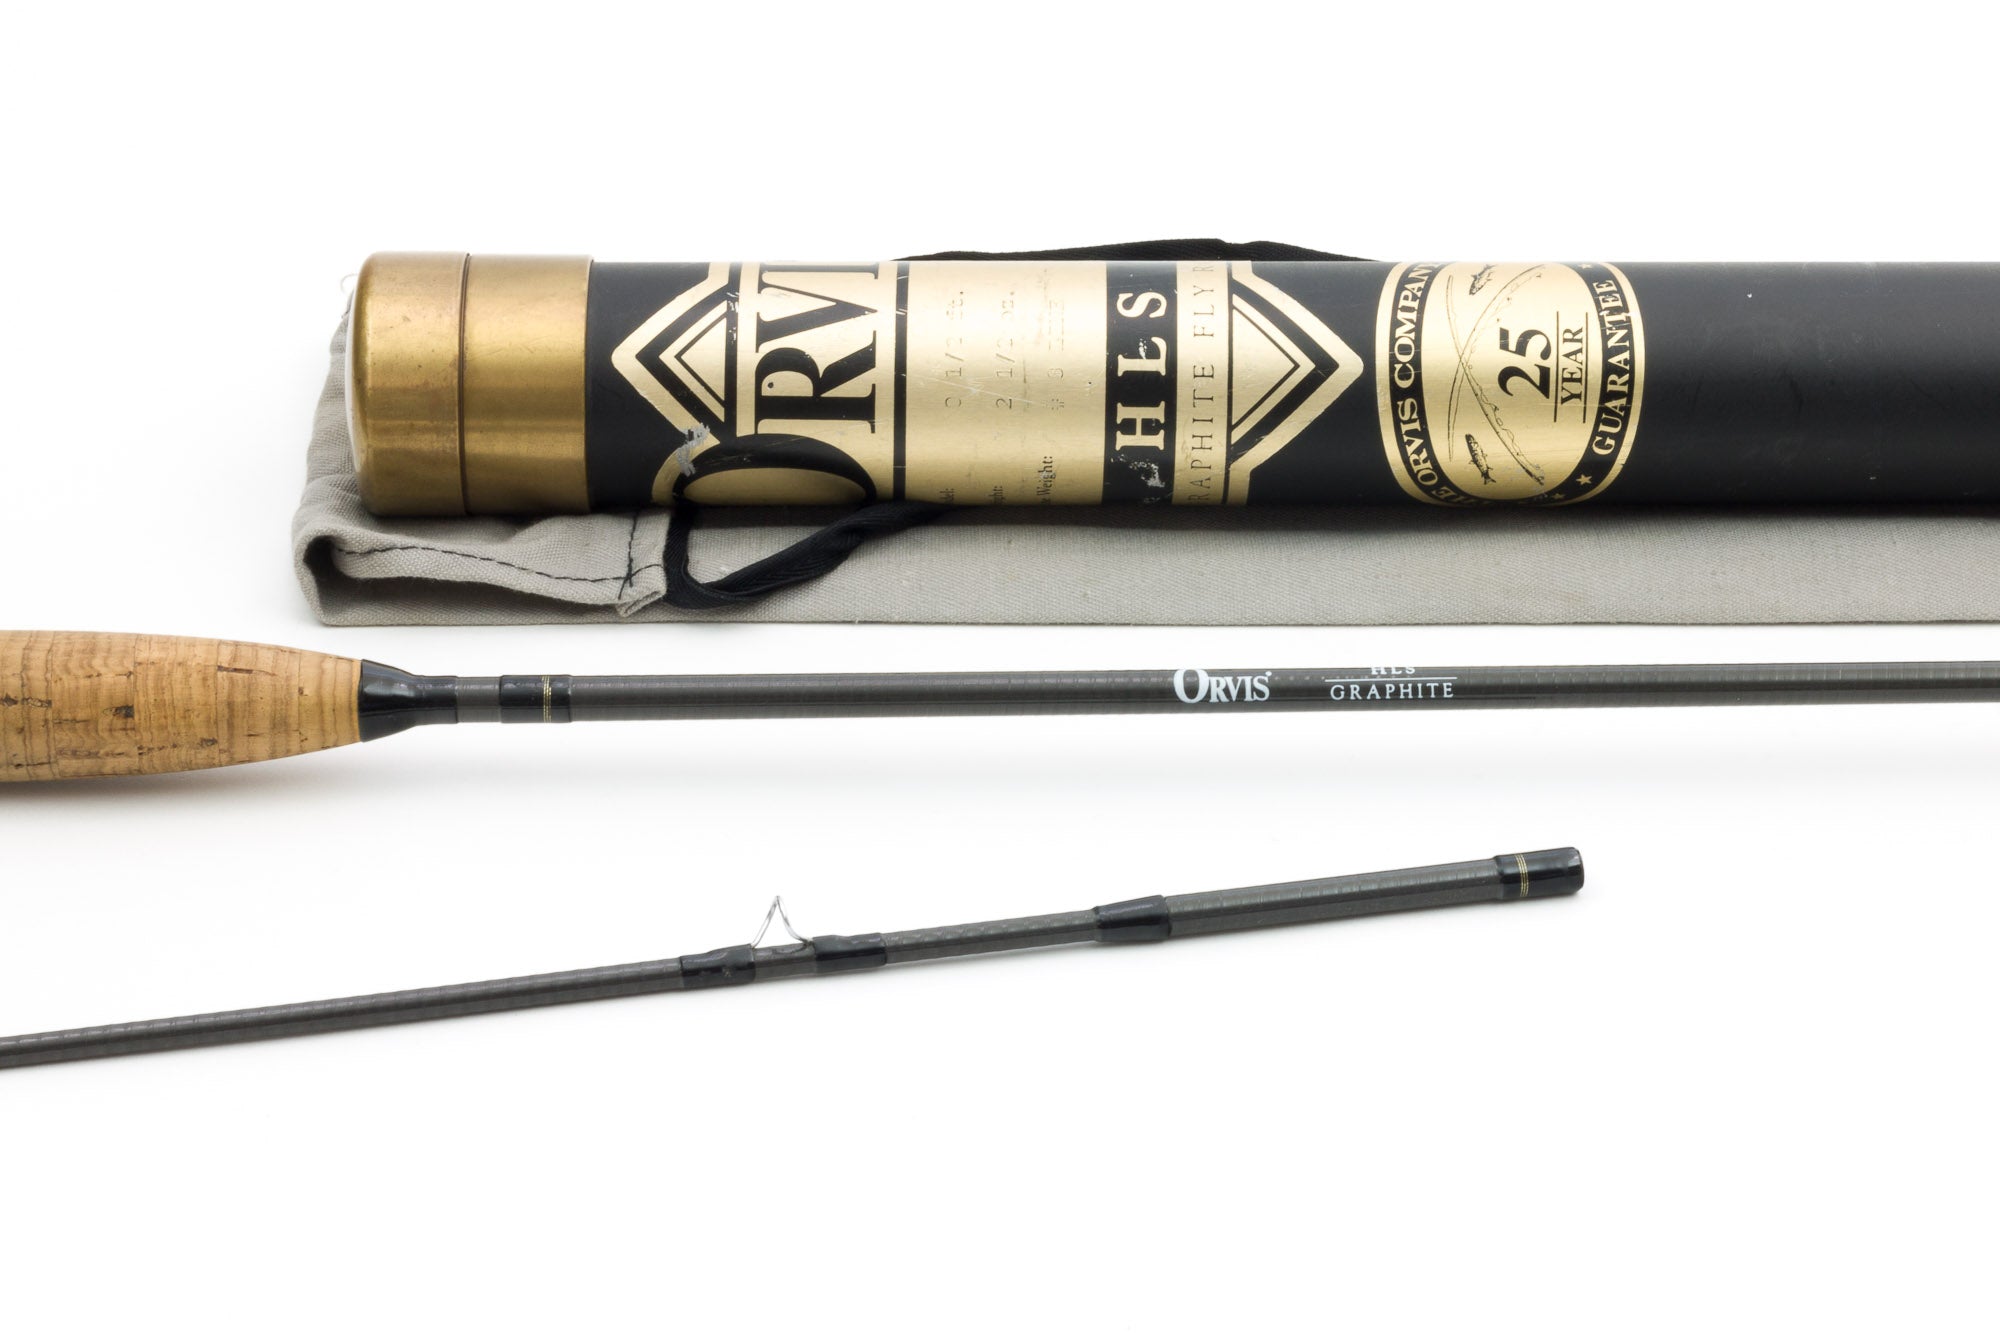 Orvis Graphite “Powerhouse” Fly Fishing Rod. 8 1/2' 8wt. W/ Tube and Sock.